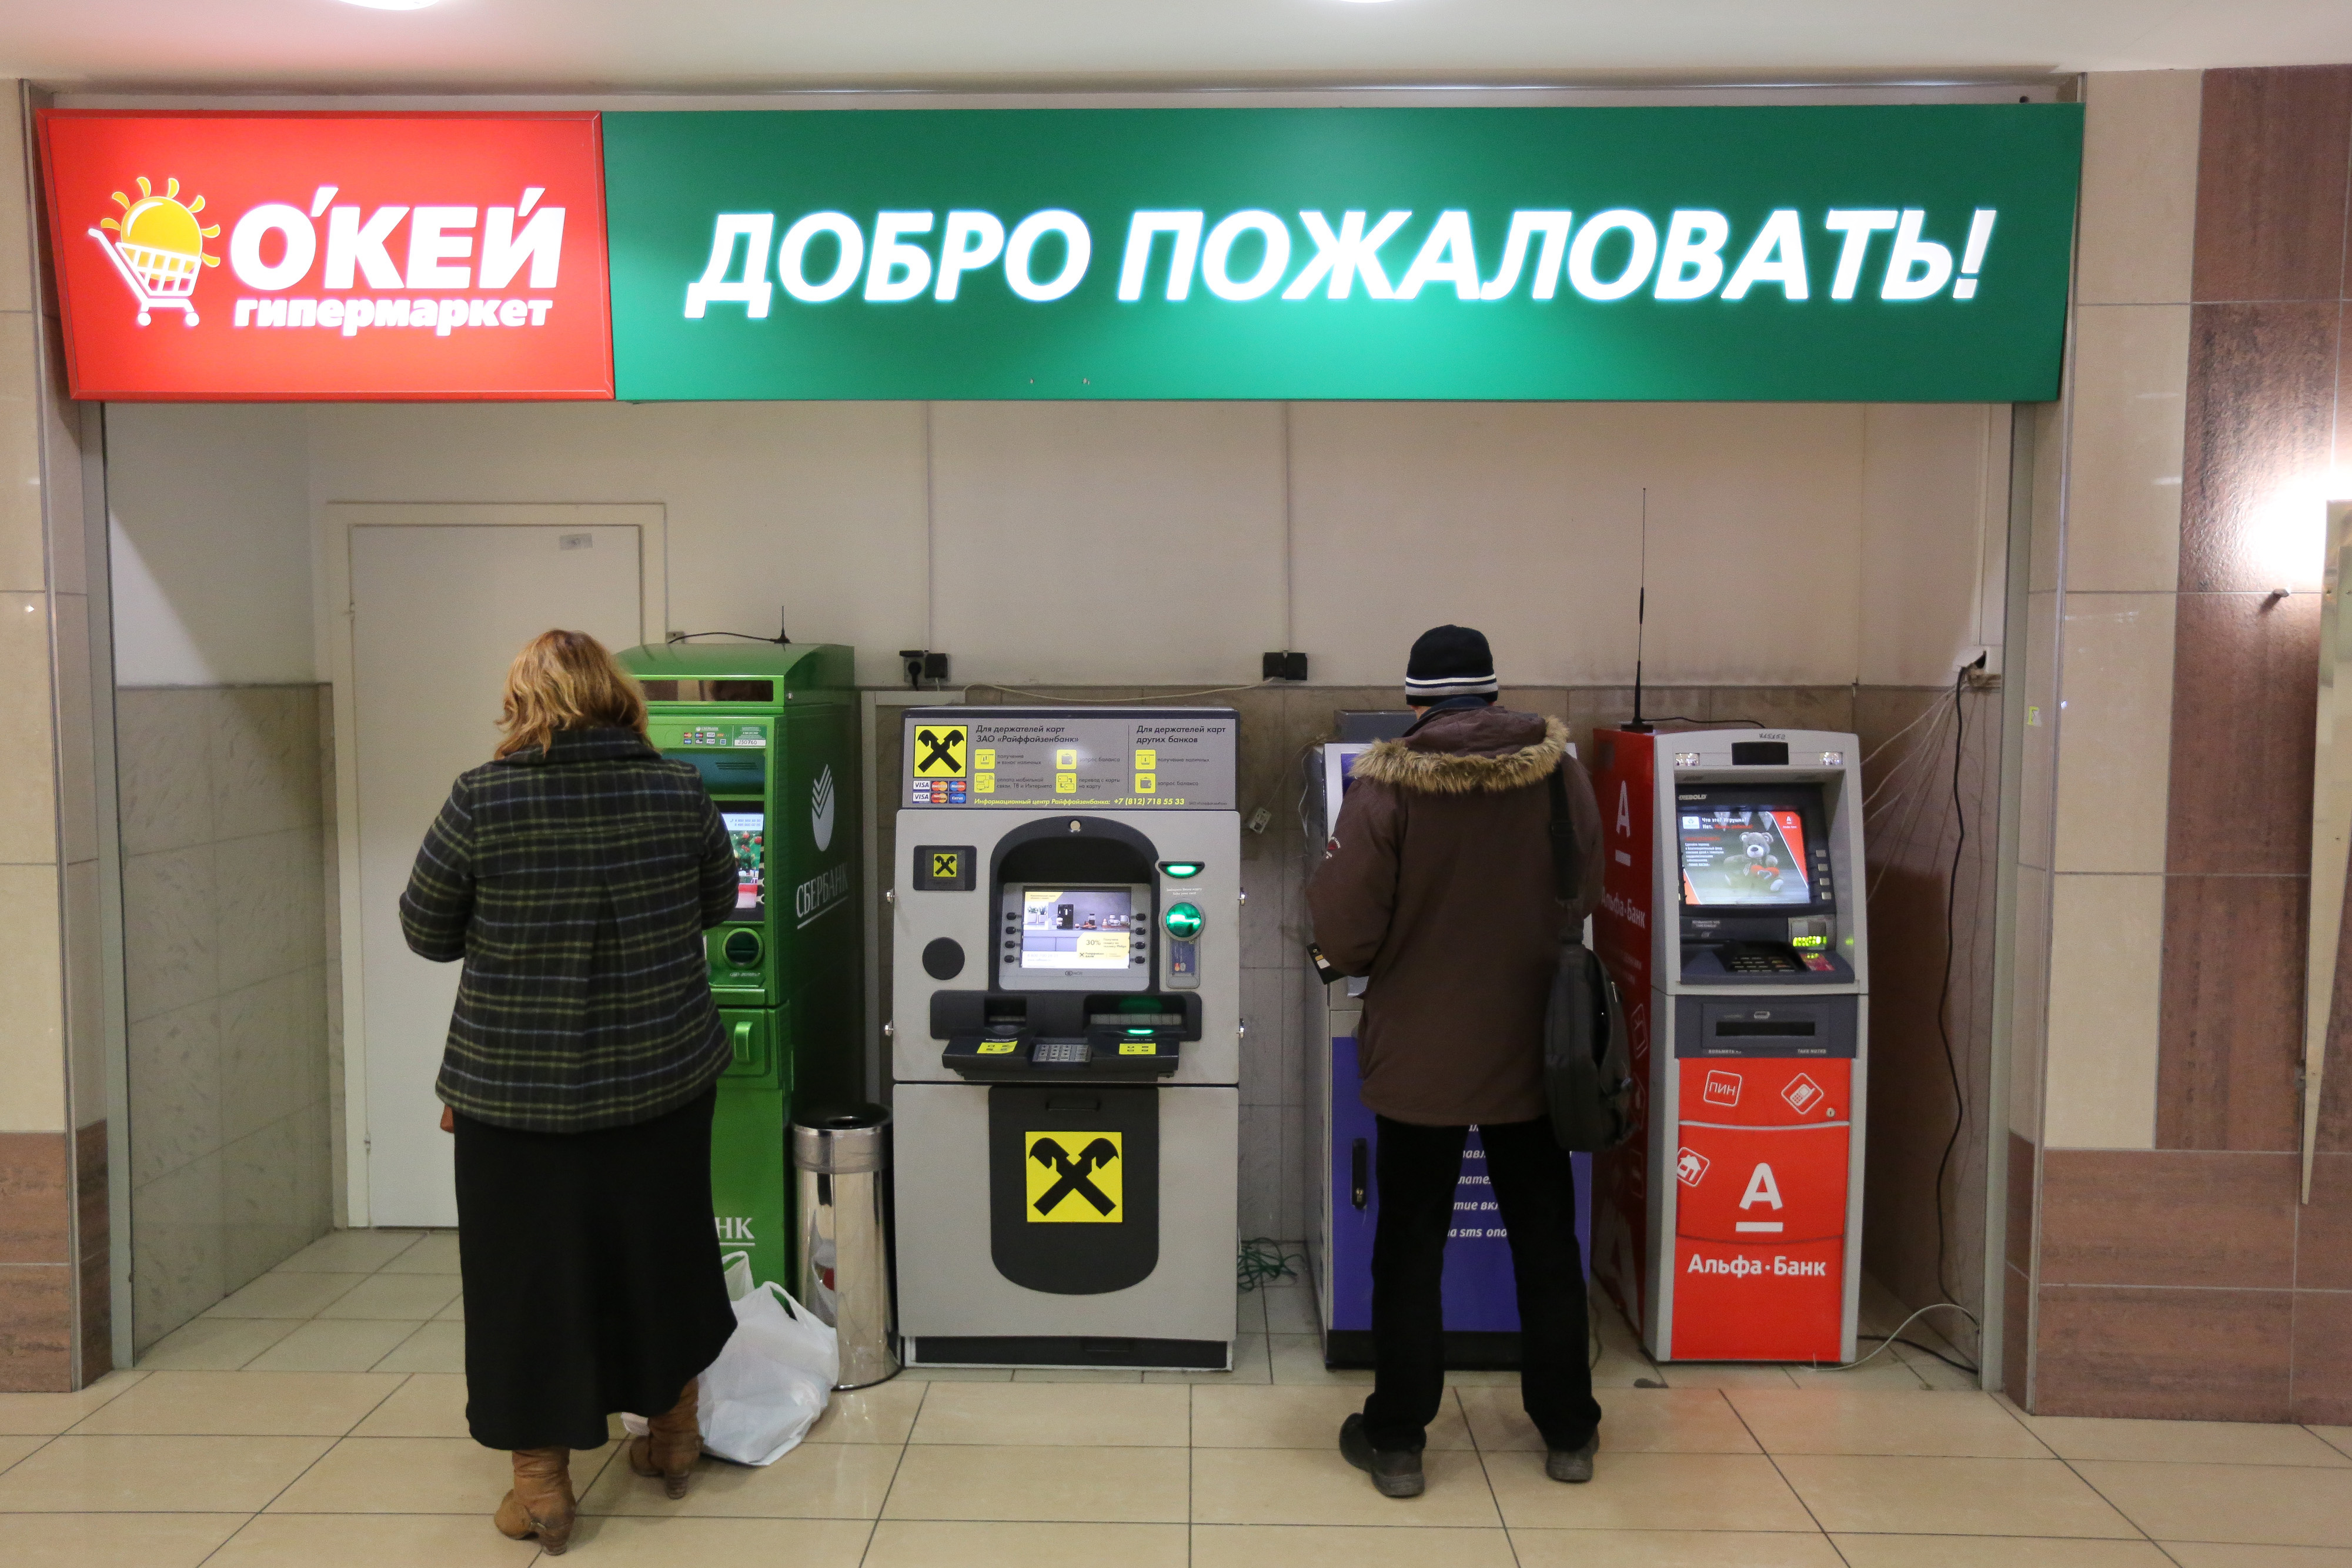 Russian Retail-Sales Growth Unexpectedly Gains Amid Ruble Crisis